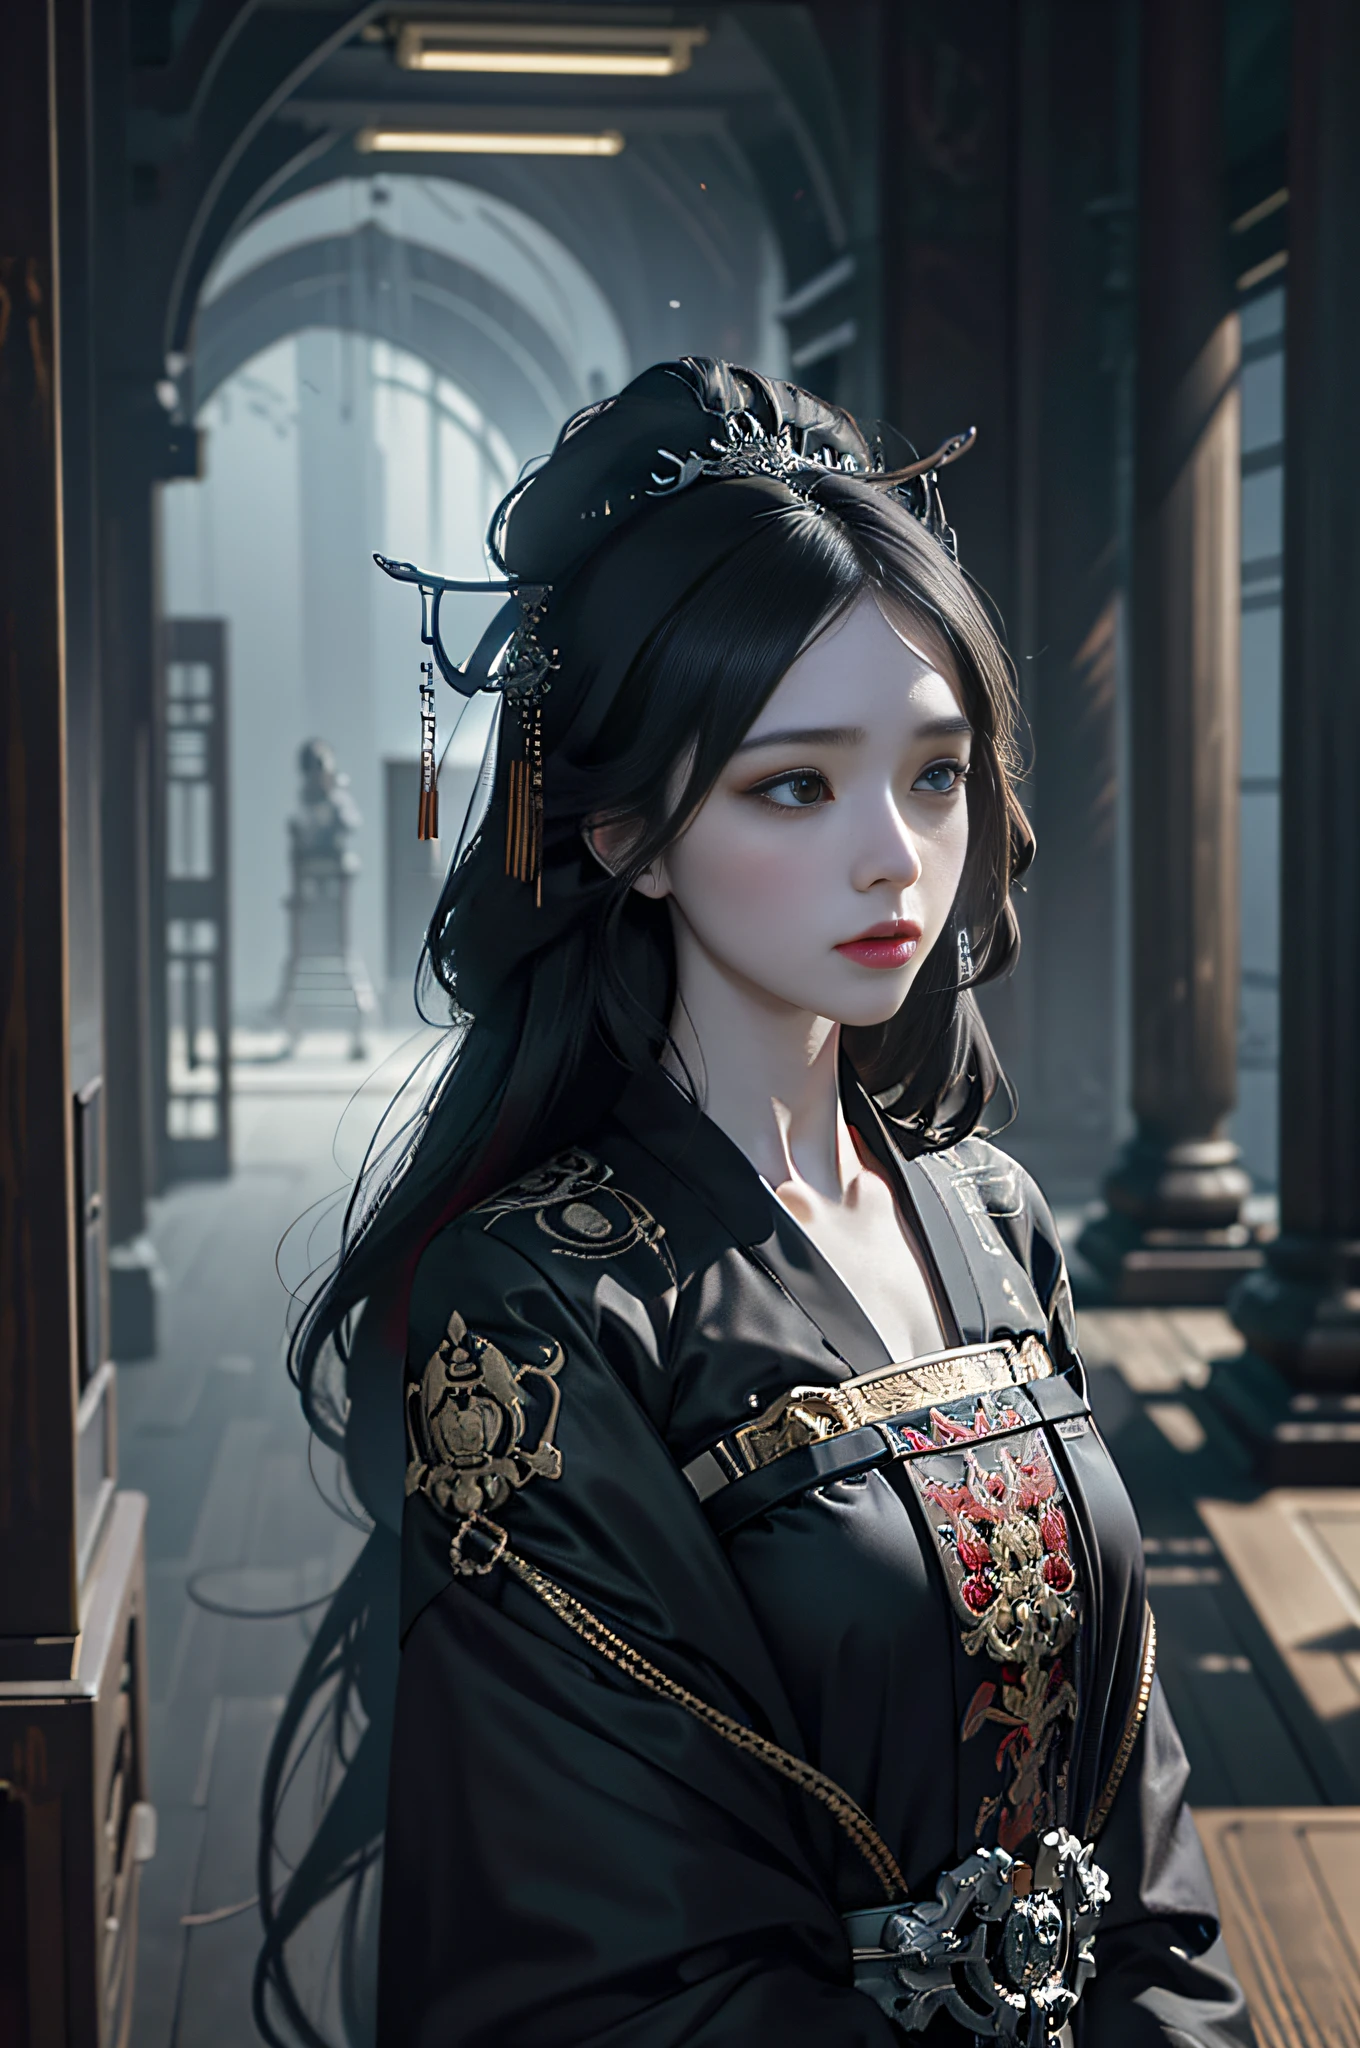 Official Art, Unity 8k Wallpaper, Ultra Detailed, Beautiful, Beautiful, Masterpiece, Best Quality, Darkness, Mystic, Romanticism, Scary, Literature, Art, Fashion, Tang Dynasty Era, Decoration, Intricate, Ironwork, Embroidery, Contemplation, Emotional Depth, Supernatural, Black Hanfu, Black Tulle, 1 Girl, Mask, Hua Dian, High Priest, Solo, Black Cat, Cat, Sad, Bloodstain, Fateful, Bust Composition, Dramatic Composition, Cinematic Lighting, Dynamic Perspective, Sexy, Full of Seduction, Ancient Chinese architectural background, temples, altars, black fog,